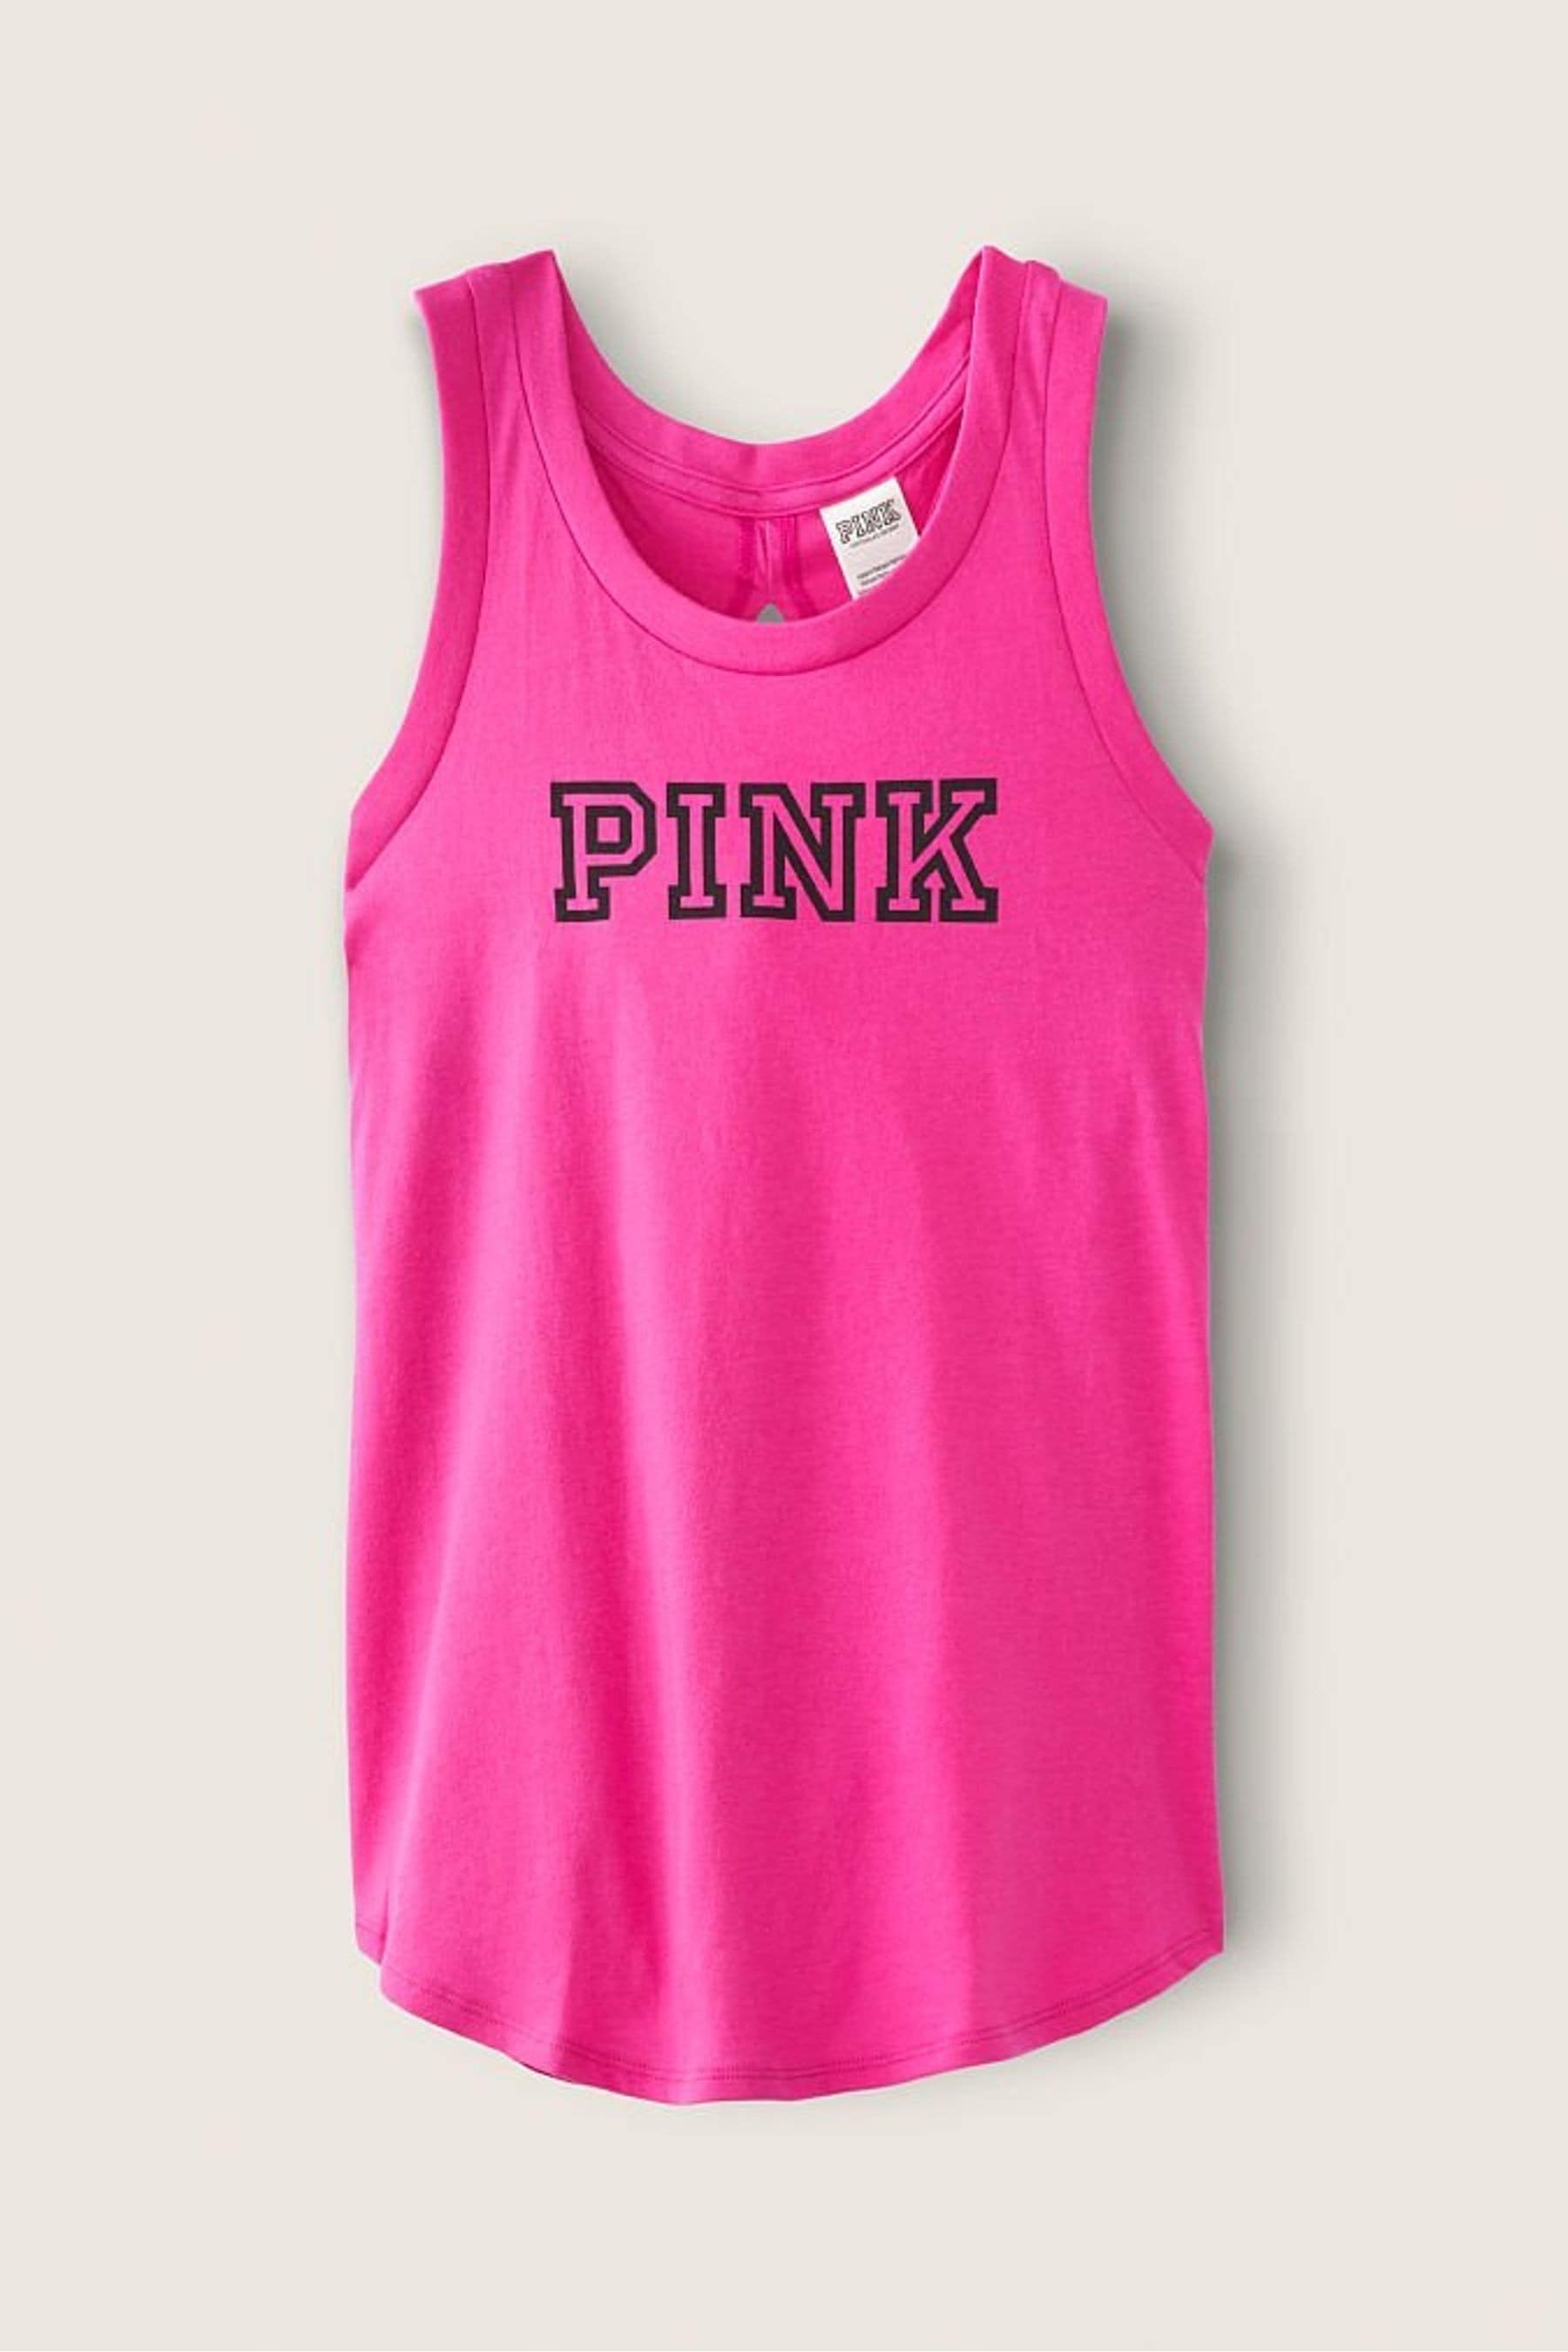 Buy Victoria's Secret PINK Everyday Tank Top from the Victoria's Secret ...